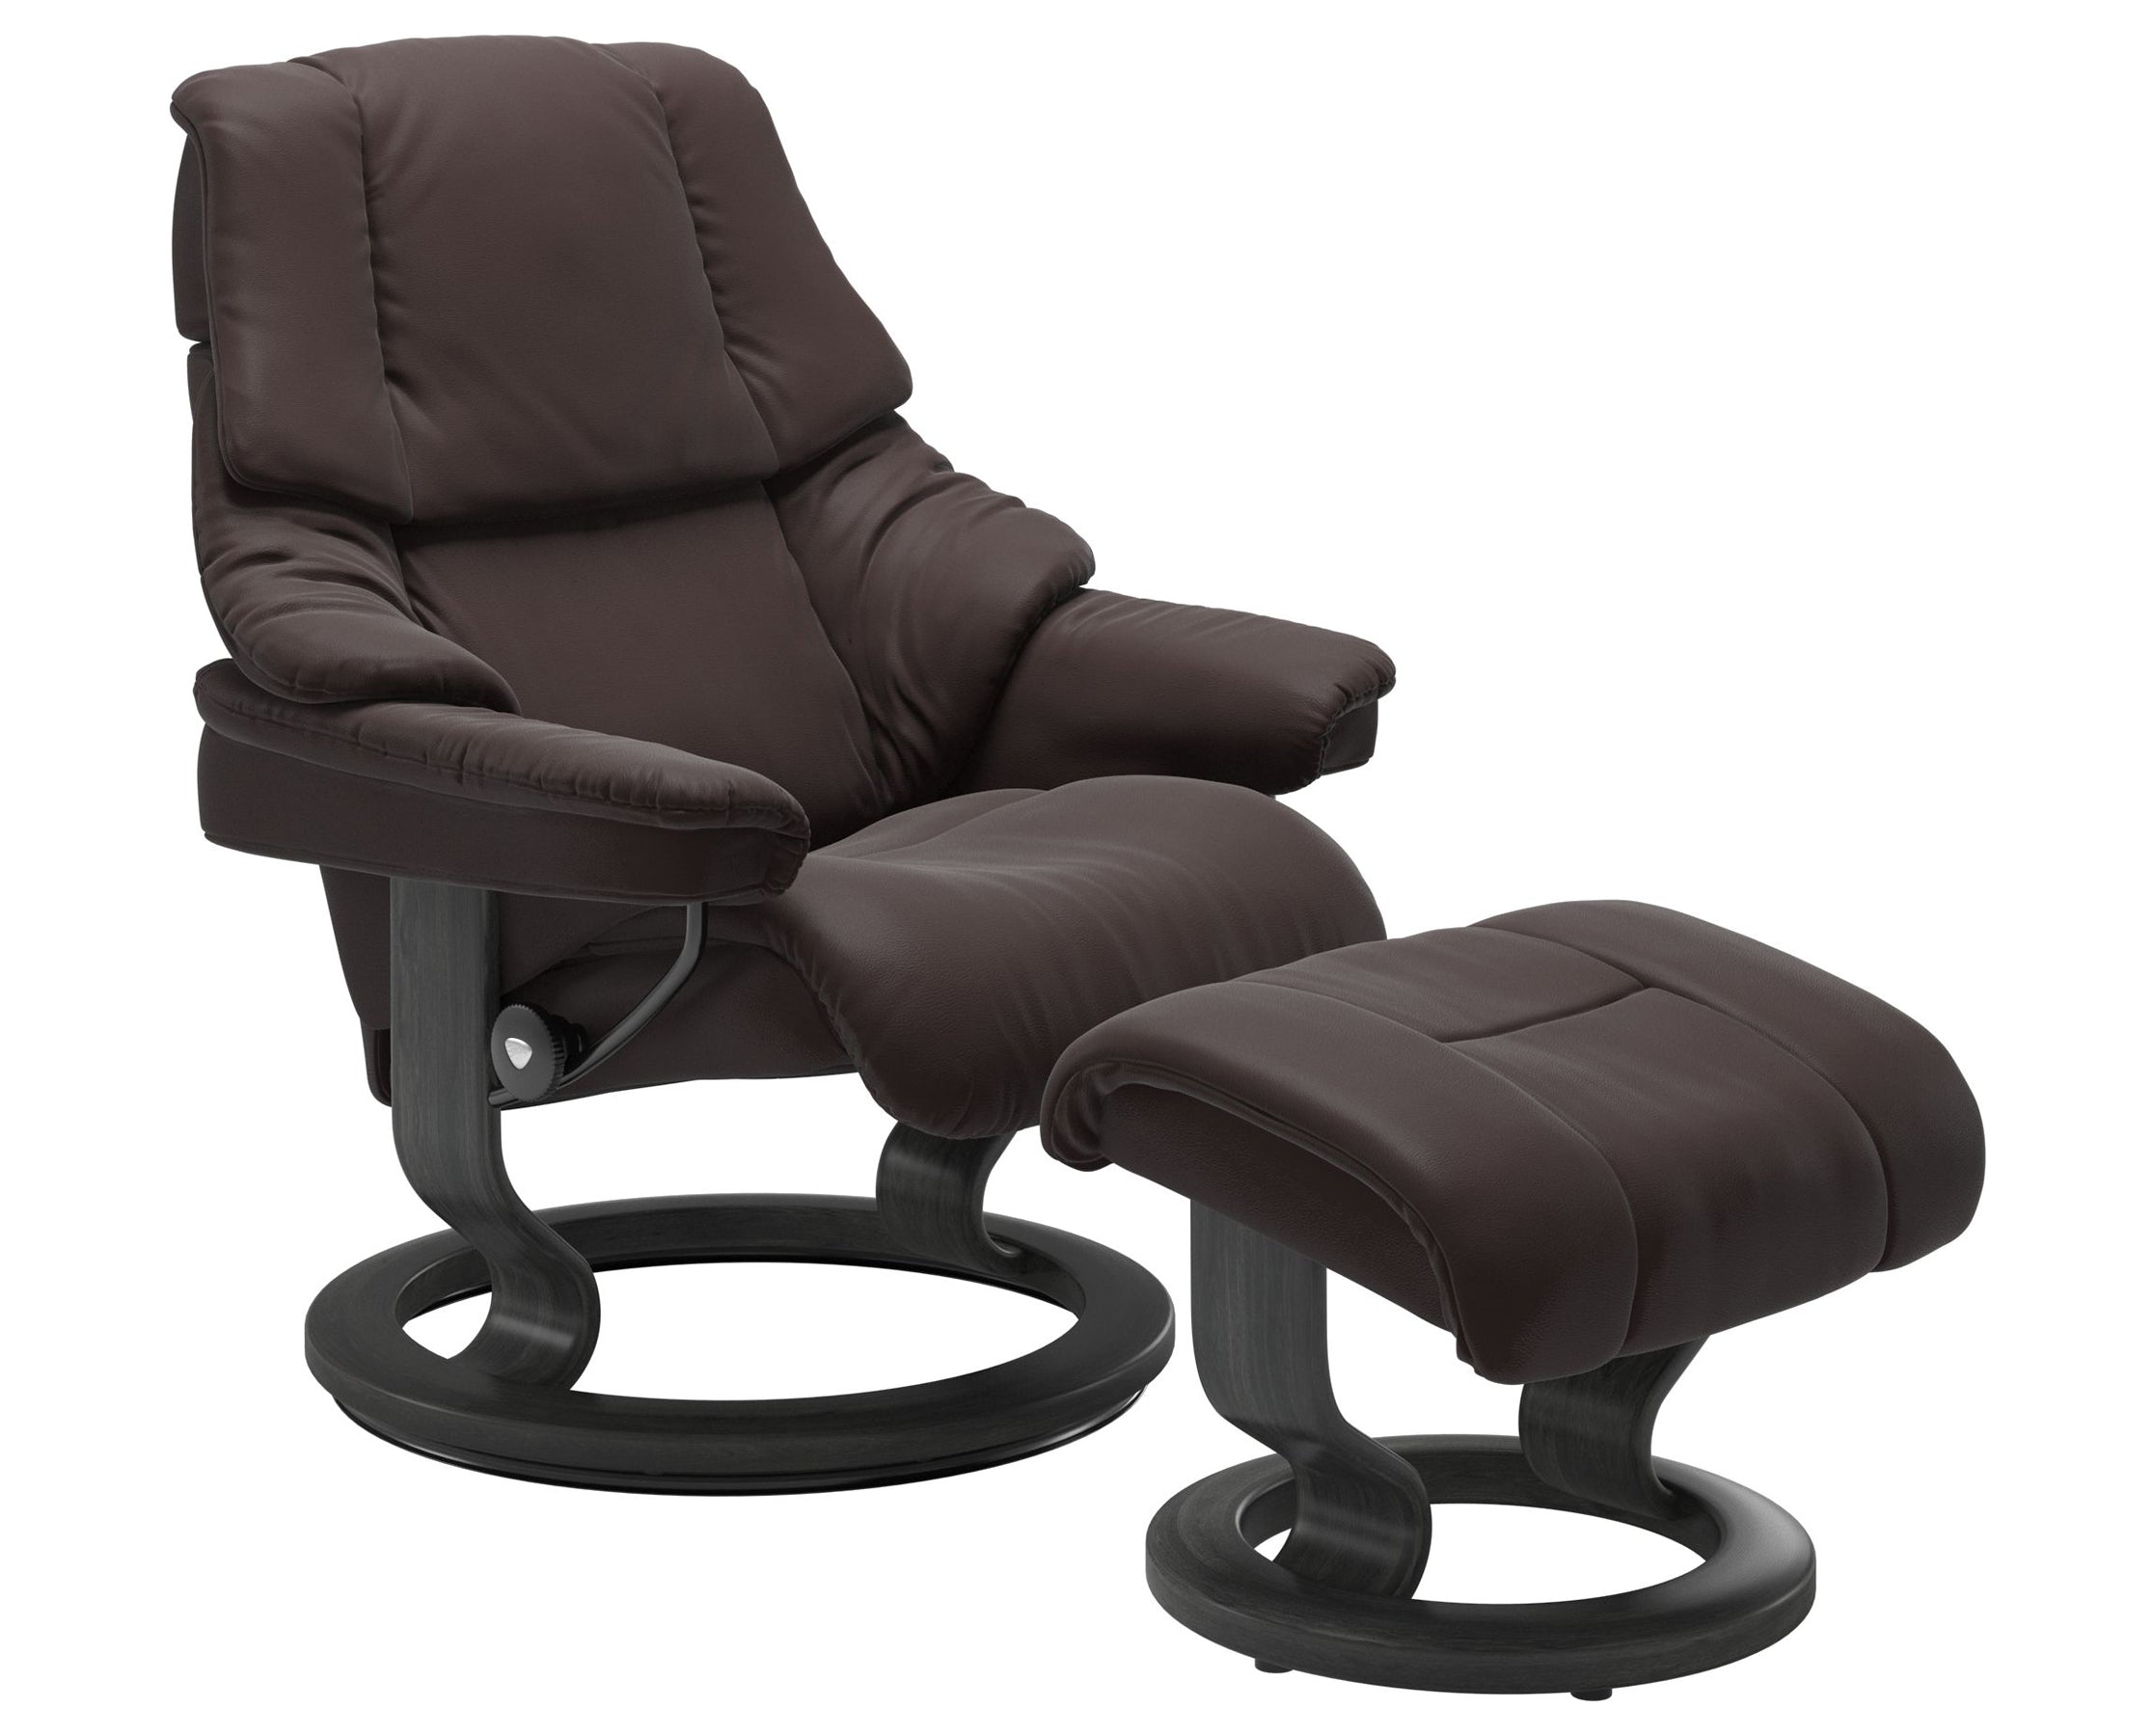 Paloma Leather Chocolate S/M/L and Grey Base | Stressless Reno Classic Recliner | Valley Ridge Furniture